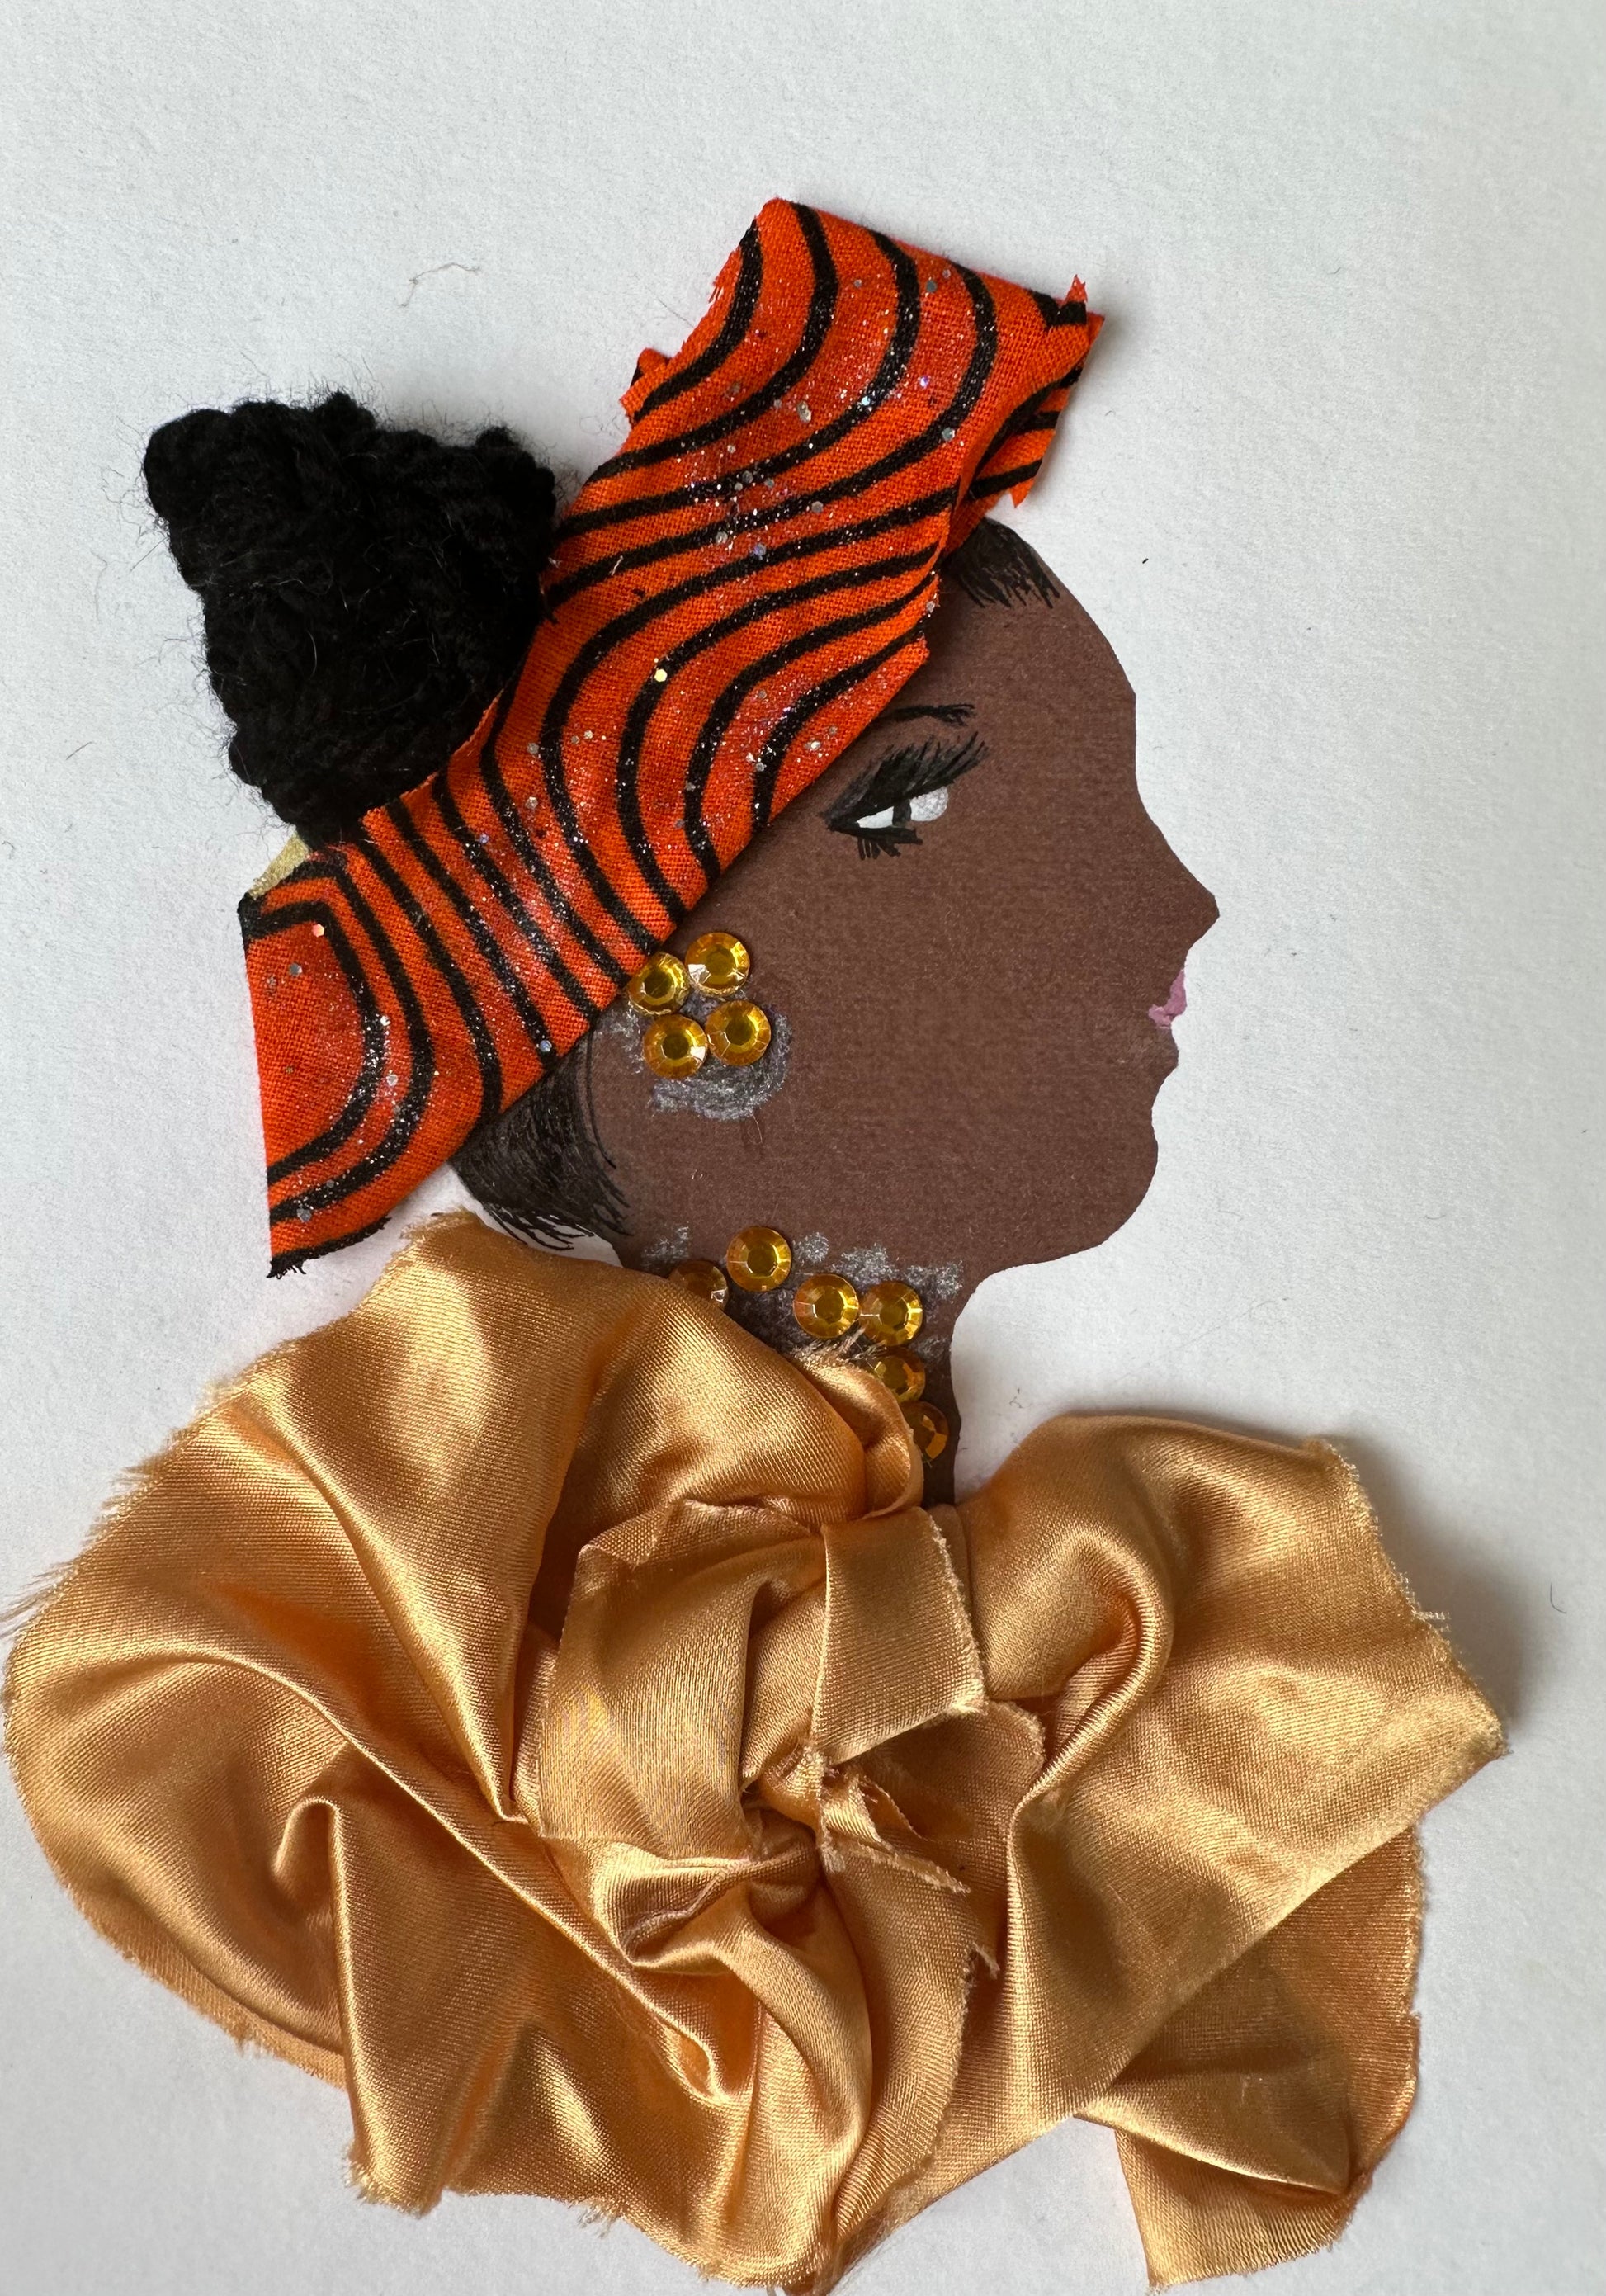 I designed this handmade card of a woman dressed in a butterscotch coloured silk blouse. Her hair is held with a orange and black striped cloth, and she is wearing gemstone earrings and necklace that match the colour of the blouse.